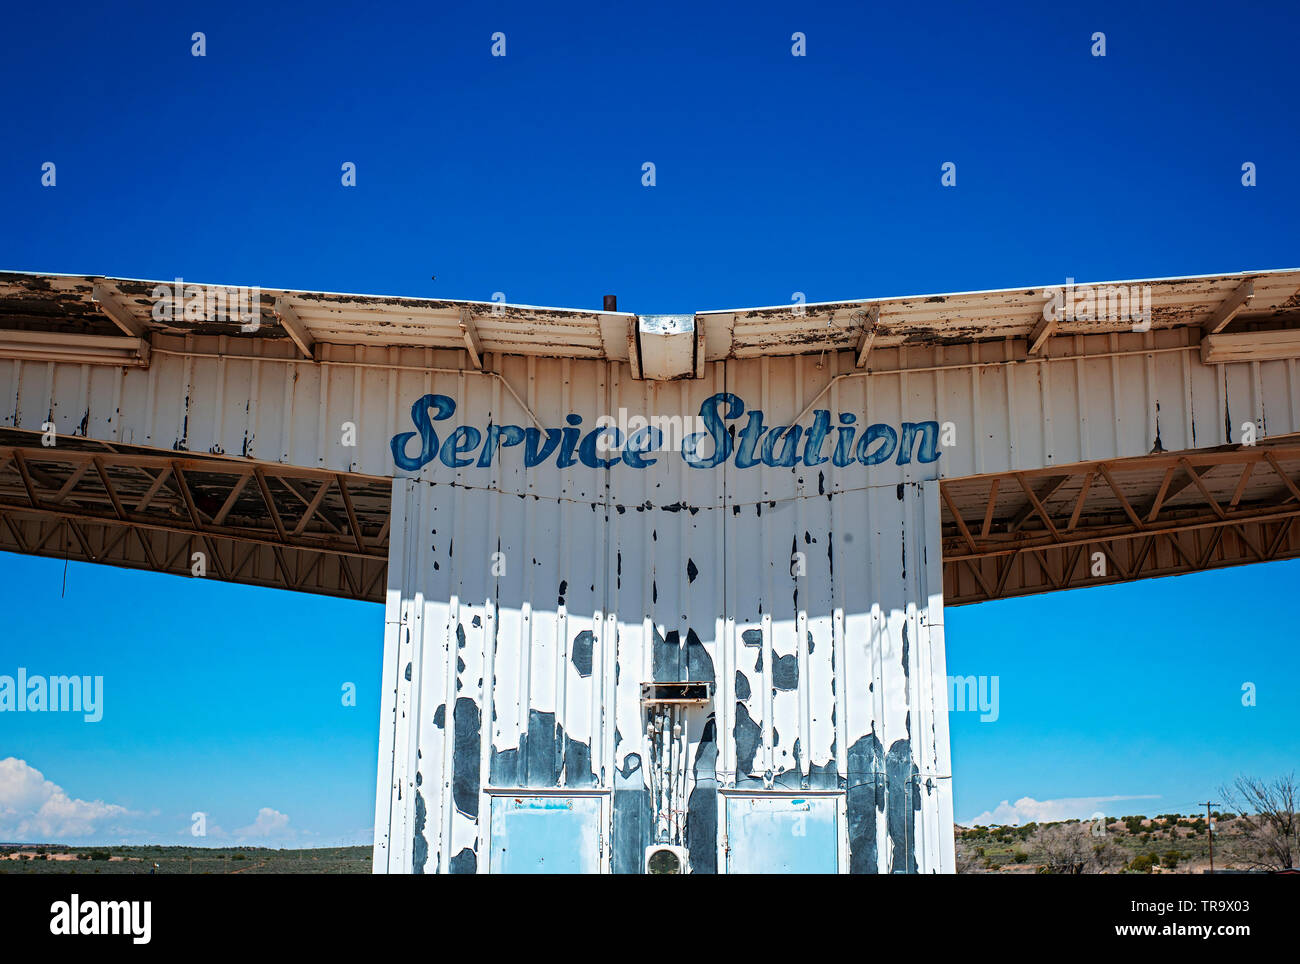 SERVICE STATION SIGN AND BUILDING CIRCA 1950 WITH CRUMBLING PAINT AND WINGED FACADE. Stock Photo